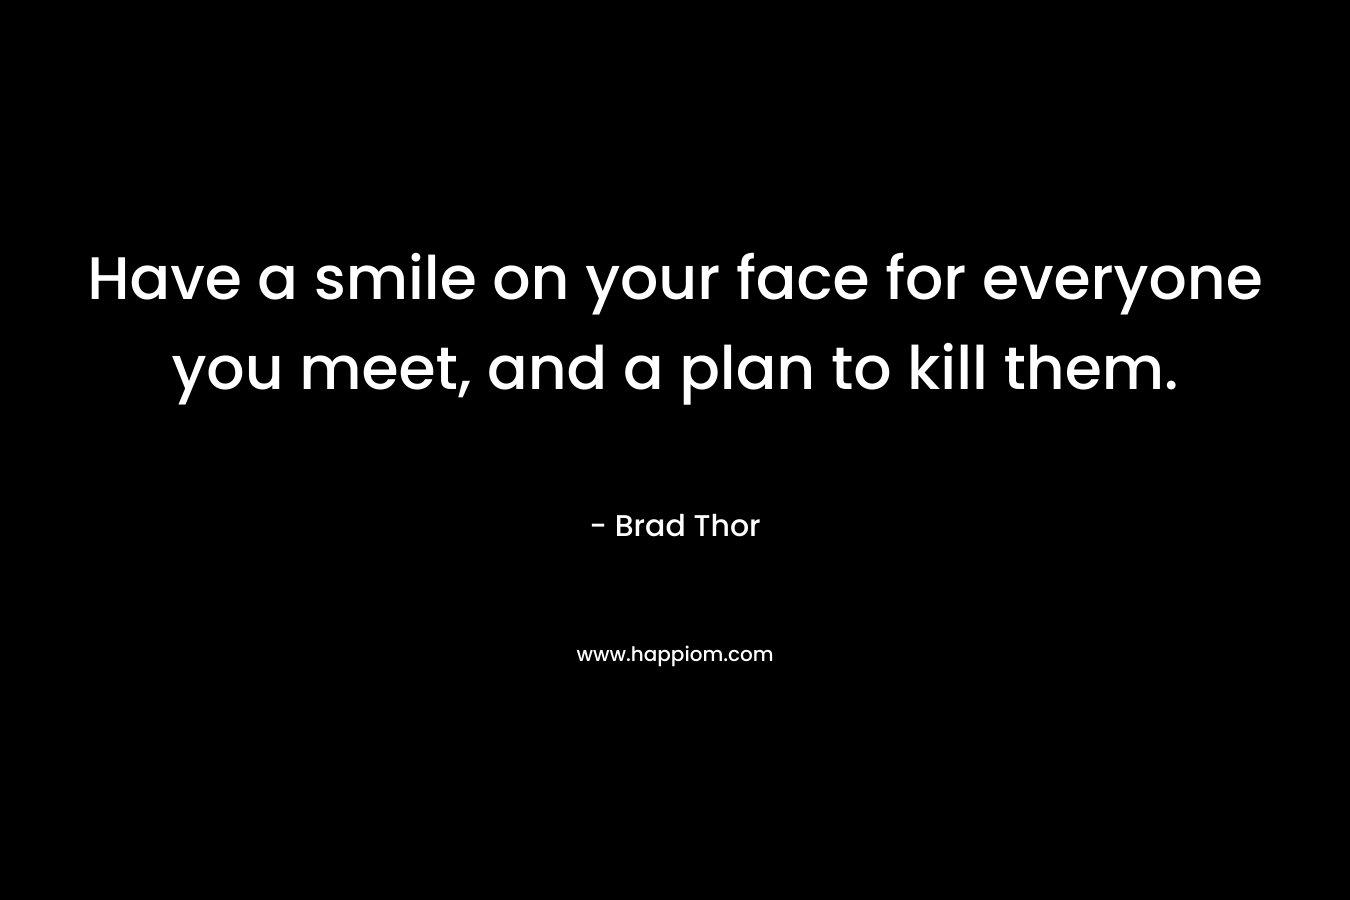 Have a smile on your face for everyone you meet, and a plan to kill them.